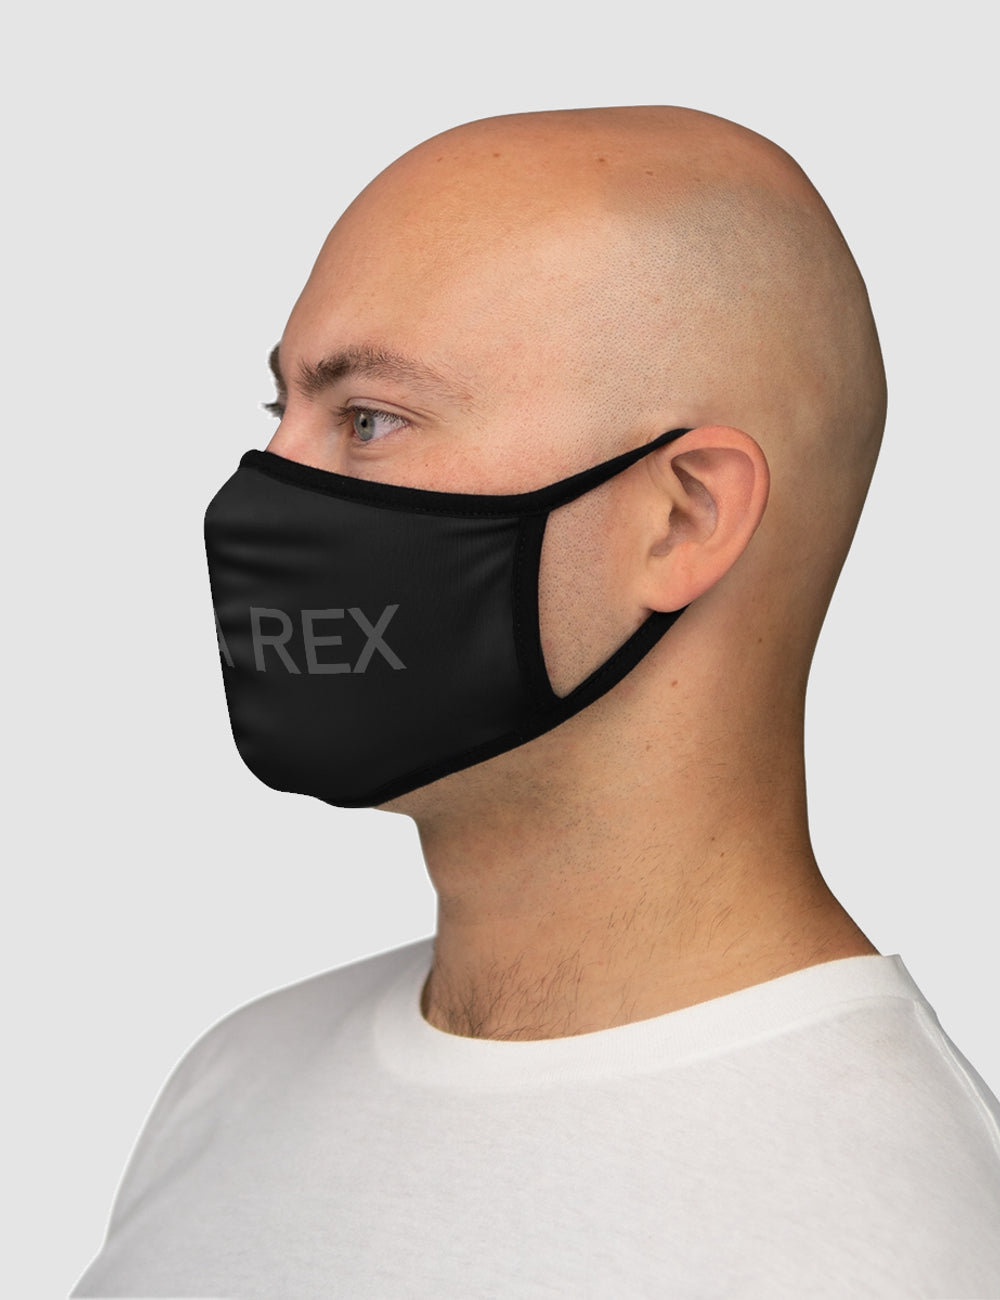 Anna Rex | Fitted Double Layered Polyester Face Mask OniTakai